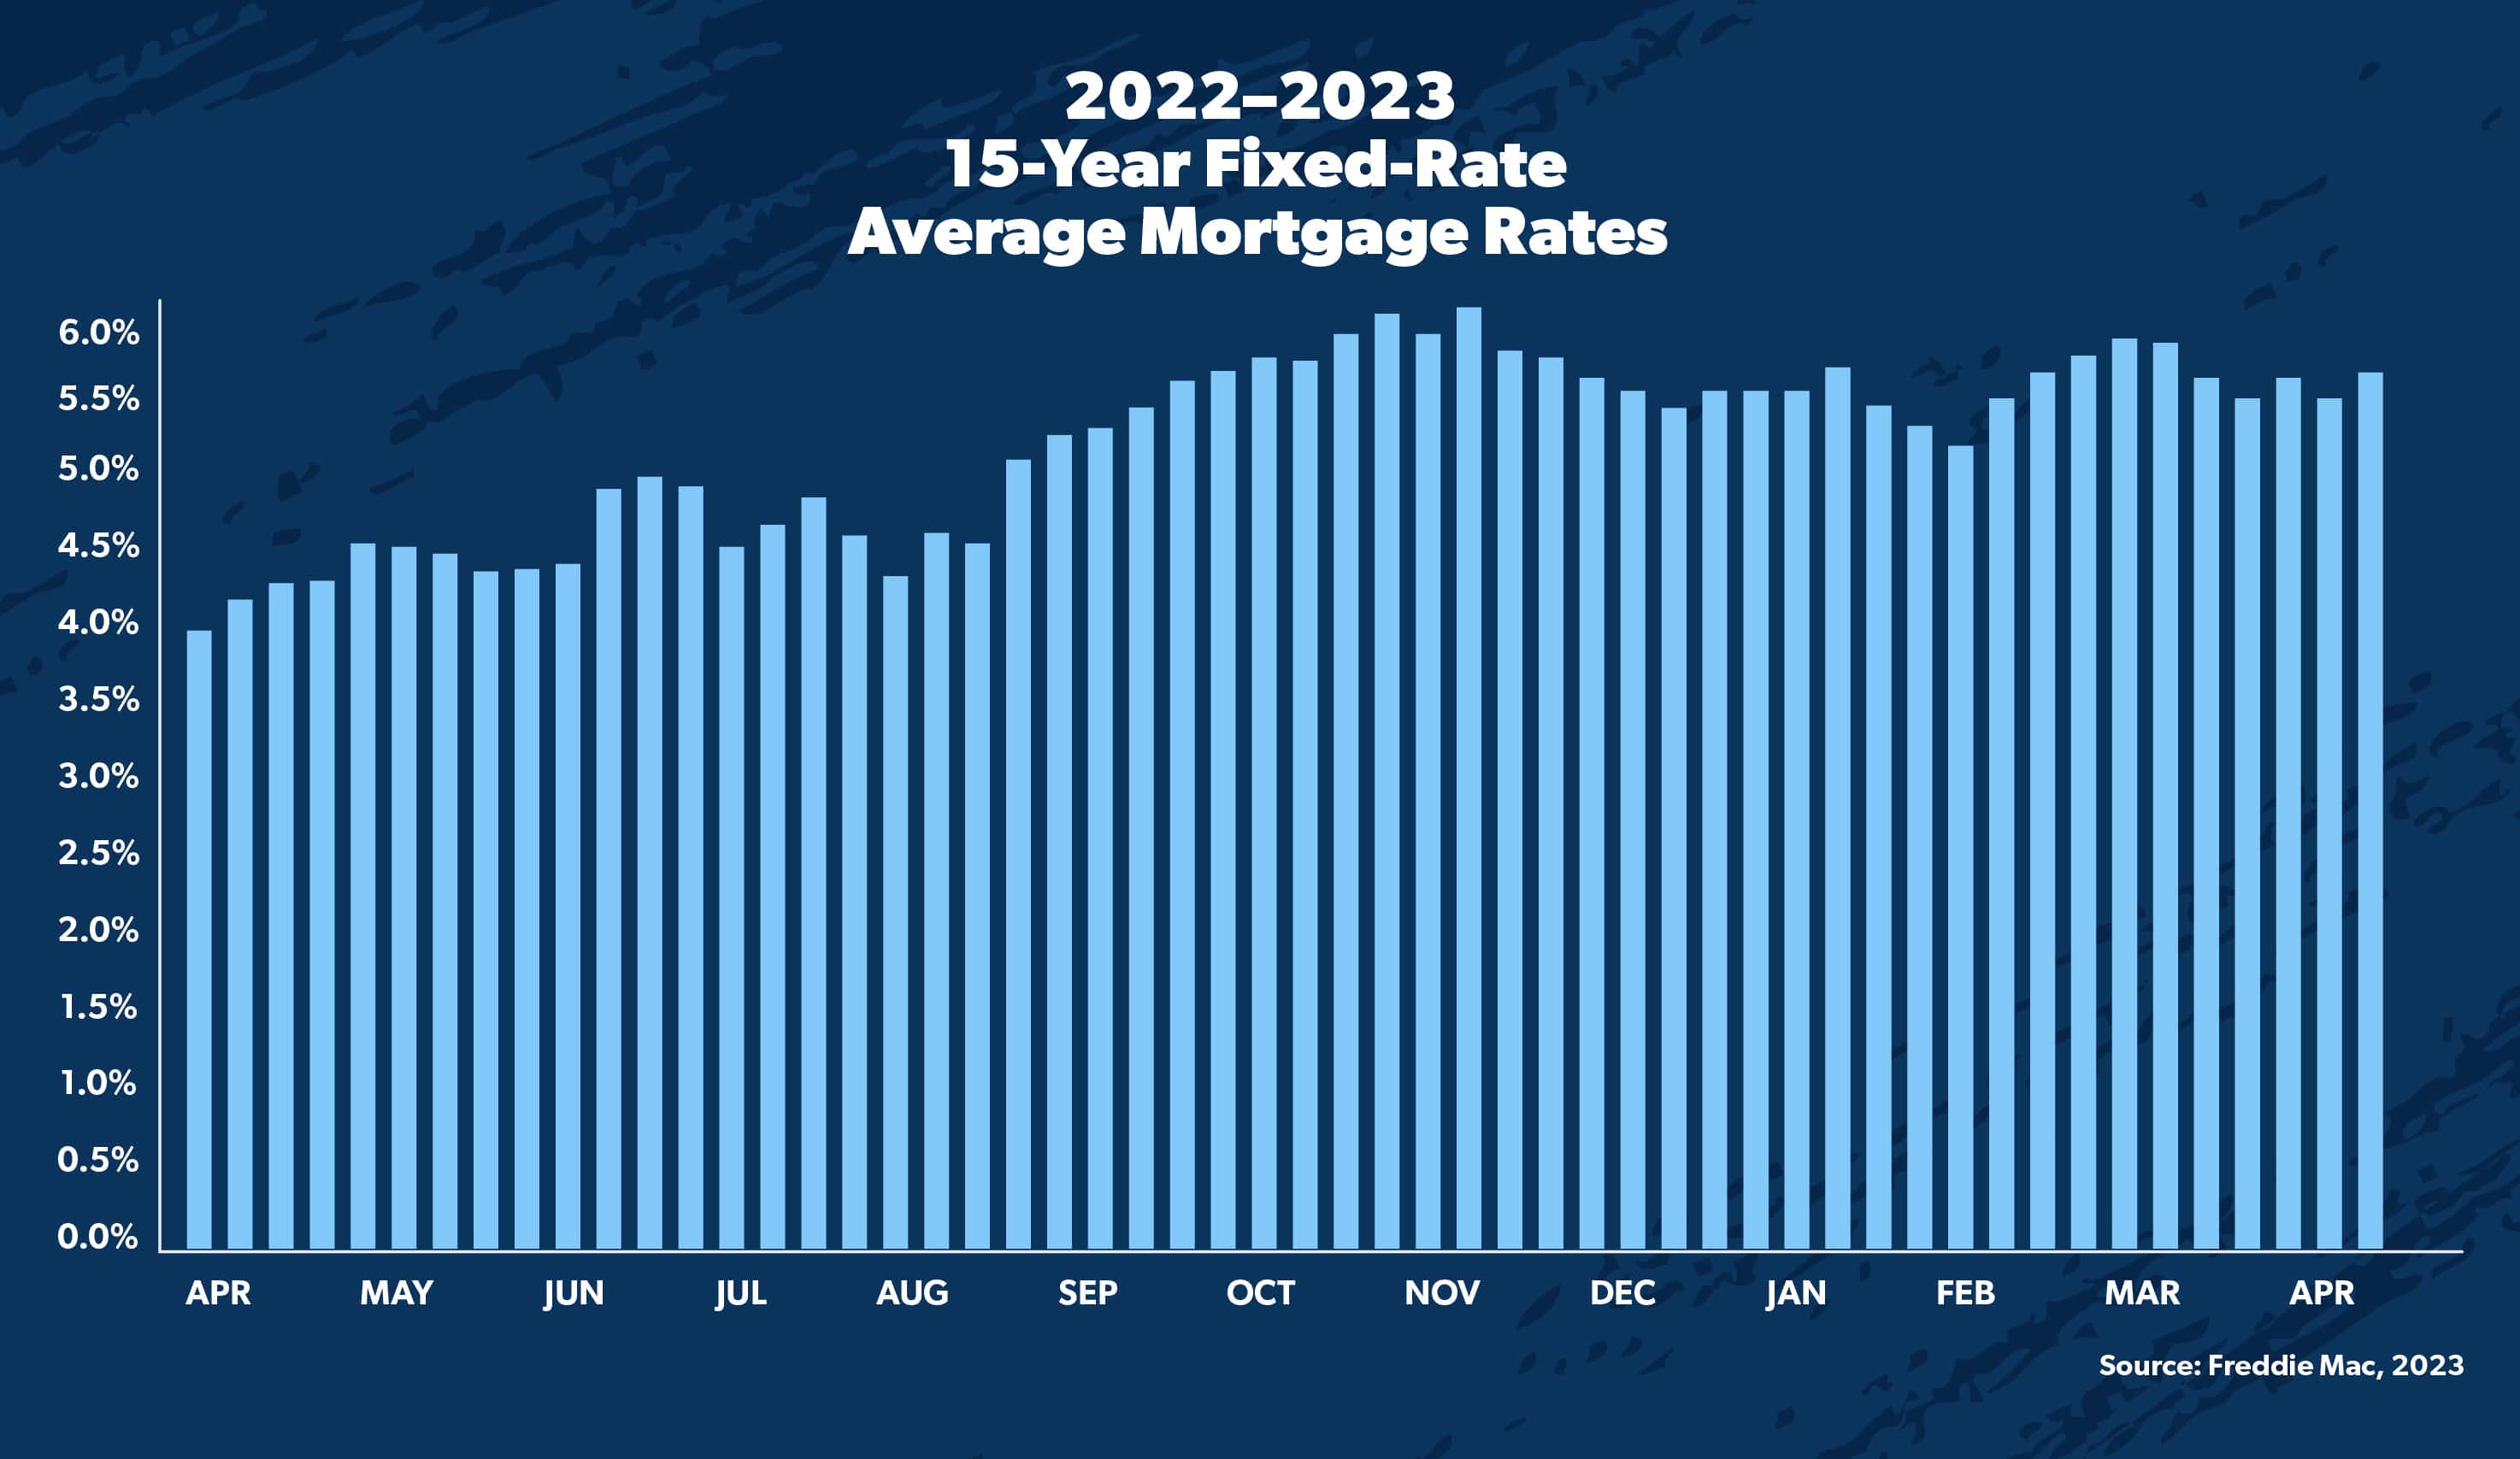 2022-2023 15-year fixed-rate average mortgage rates